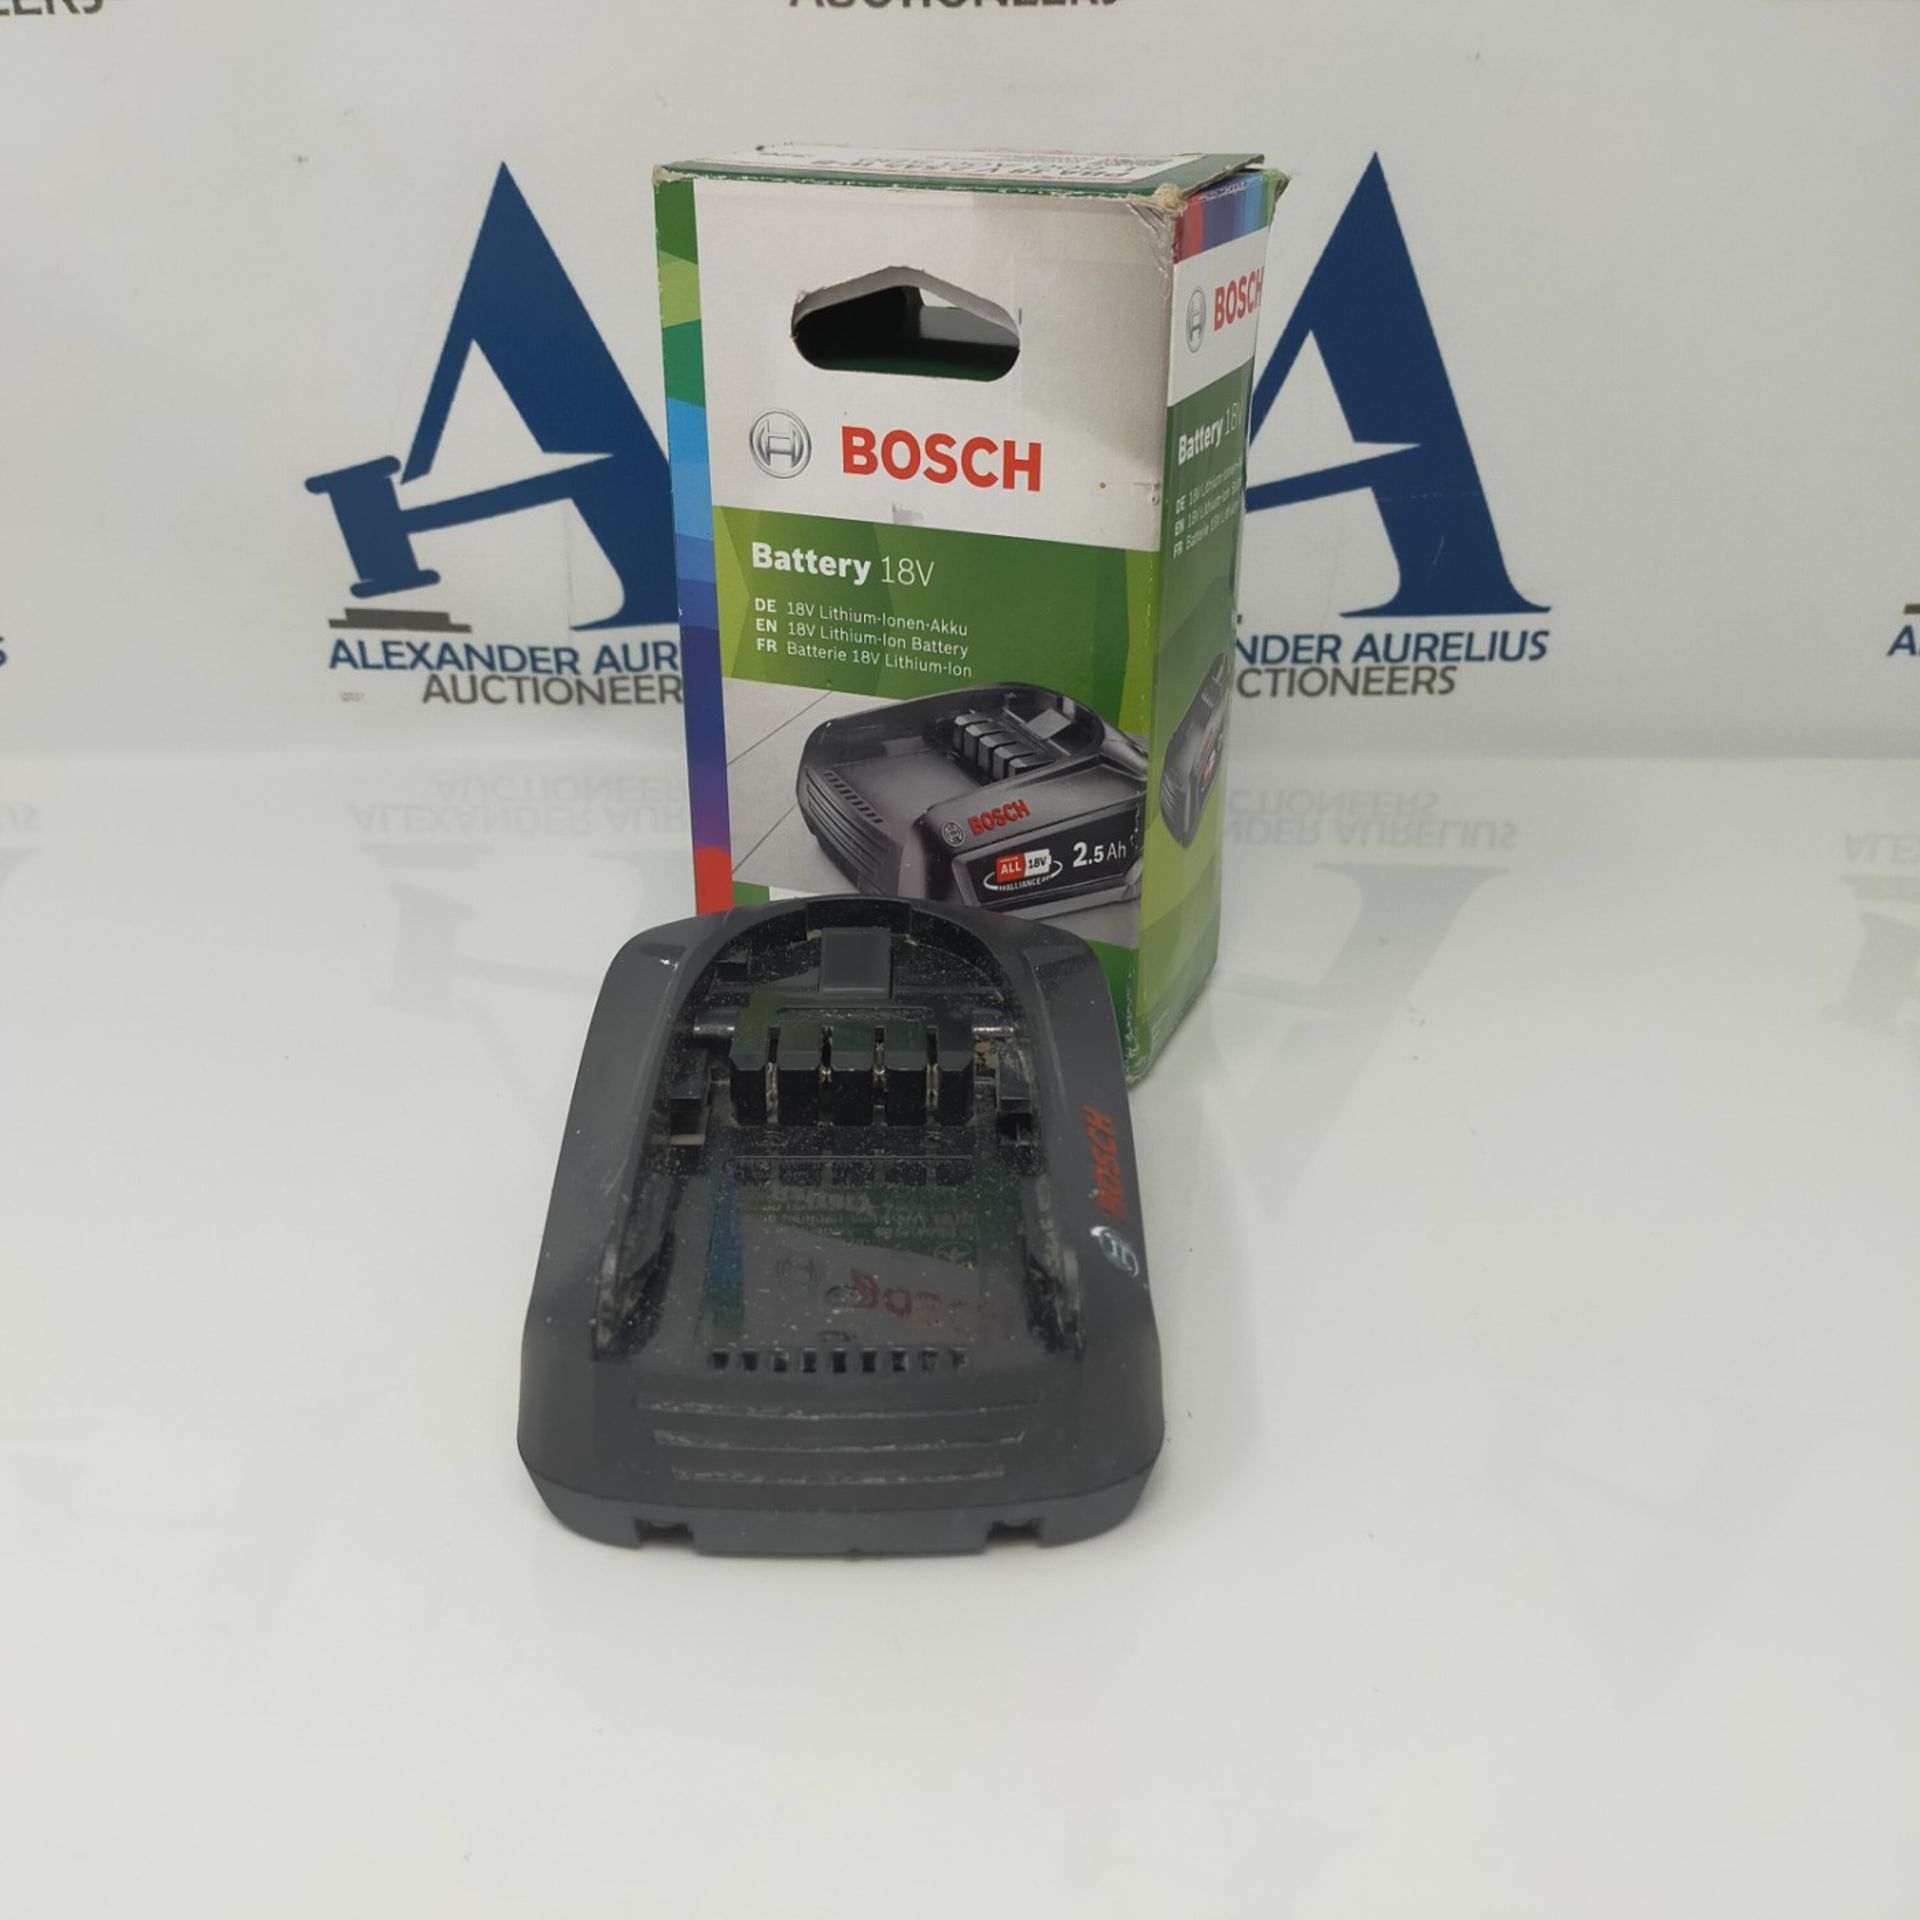 Bosch Home and Garden Battery Pack PBA 18V (battery 2.5 Ah W-B, 18 Volt System, in car - Image 2 of 2